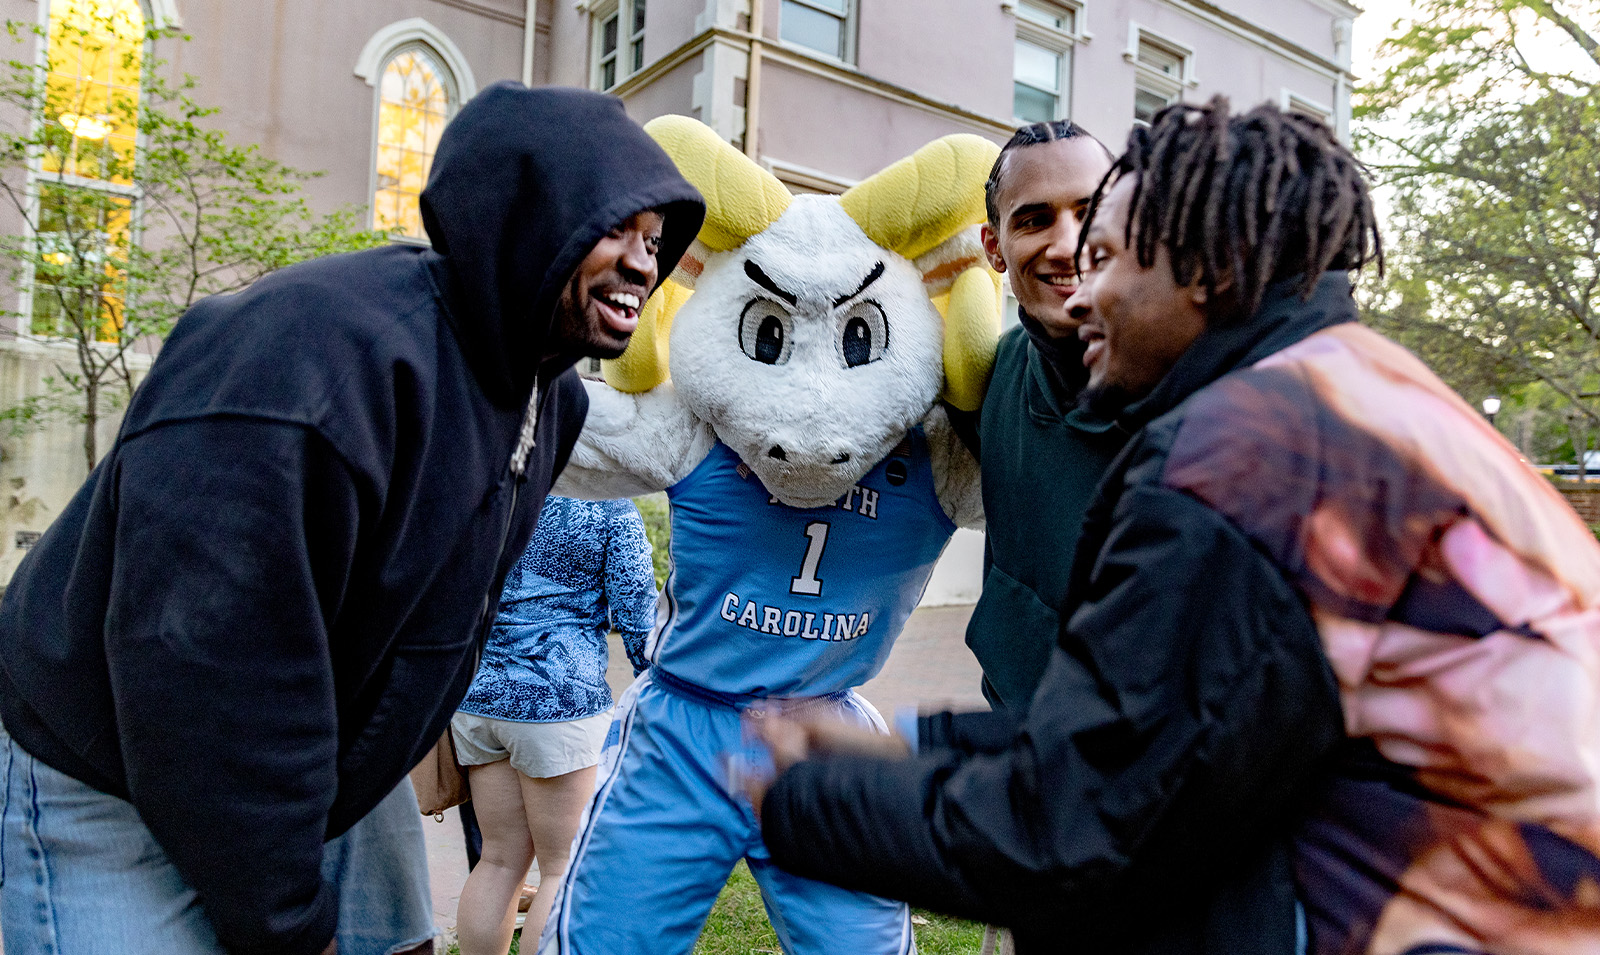 The UNC-Chapel Hill ram mascot, Rameses, huddled with three students.